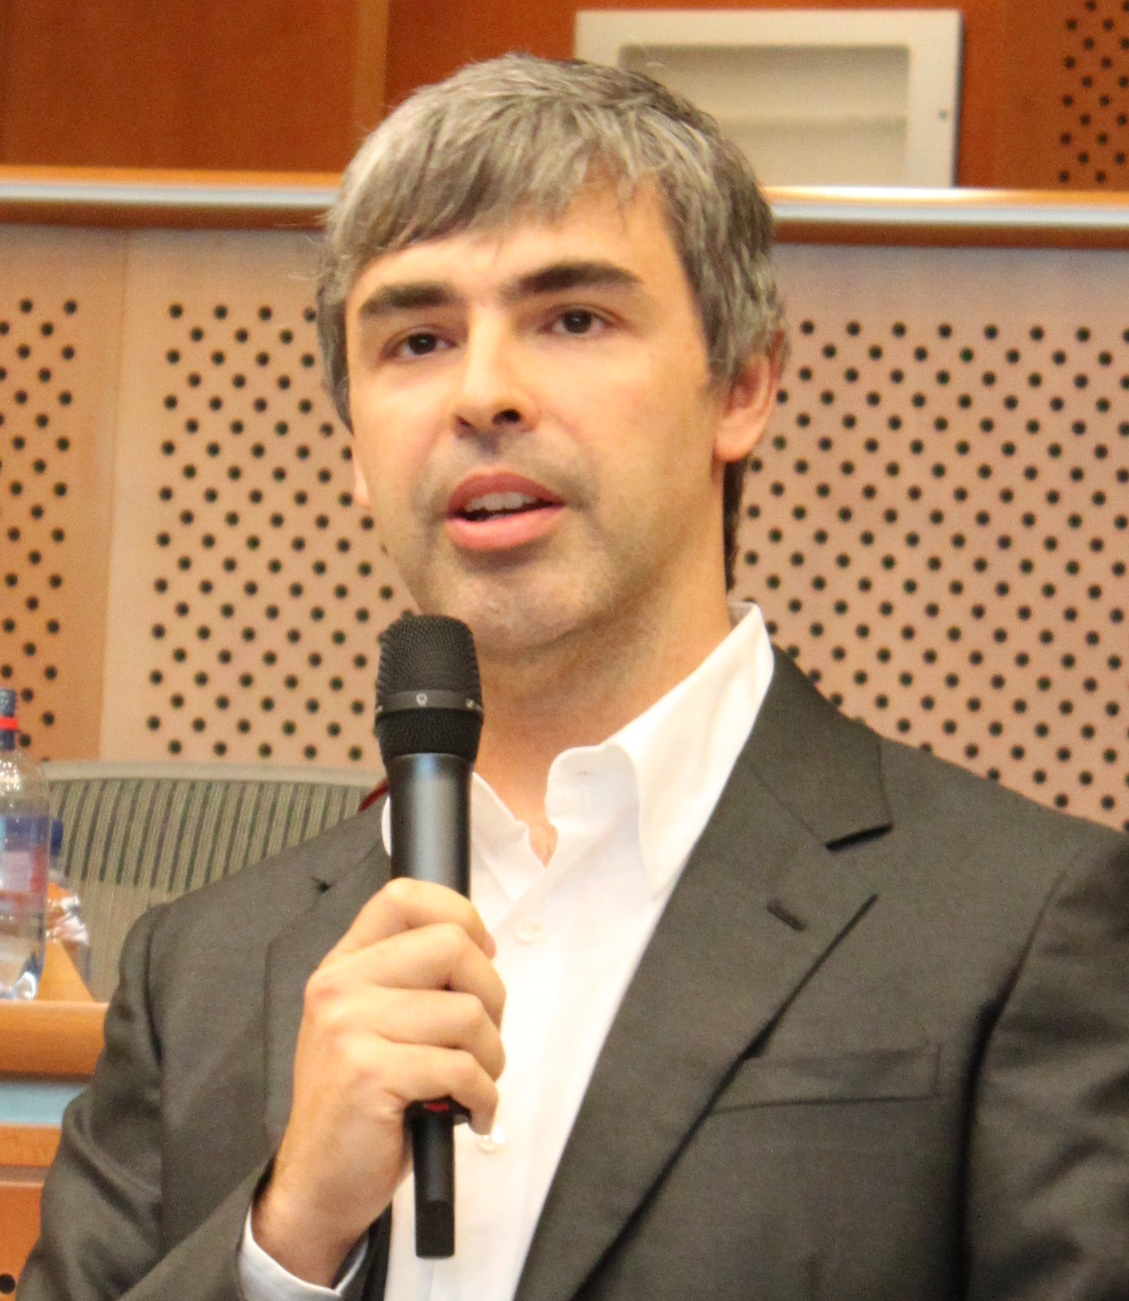 Supportive Leadership - Larry Page